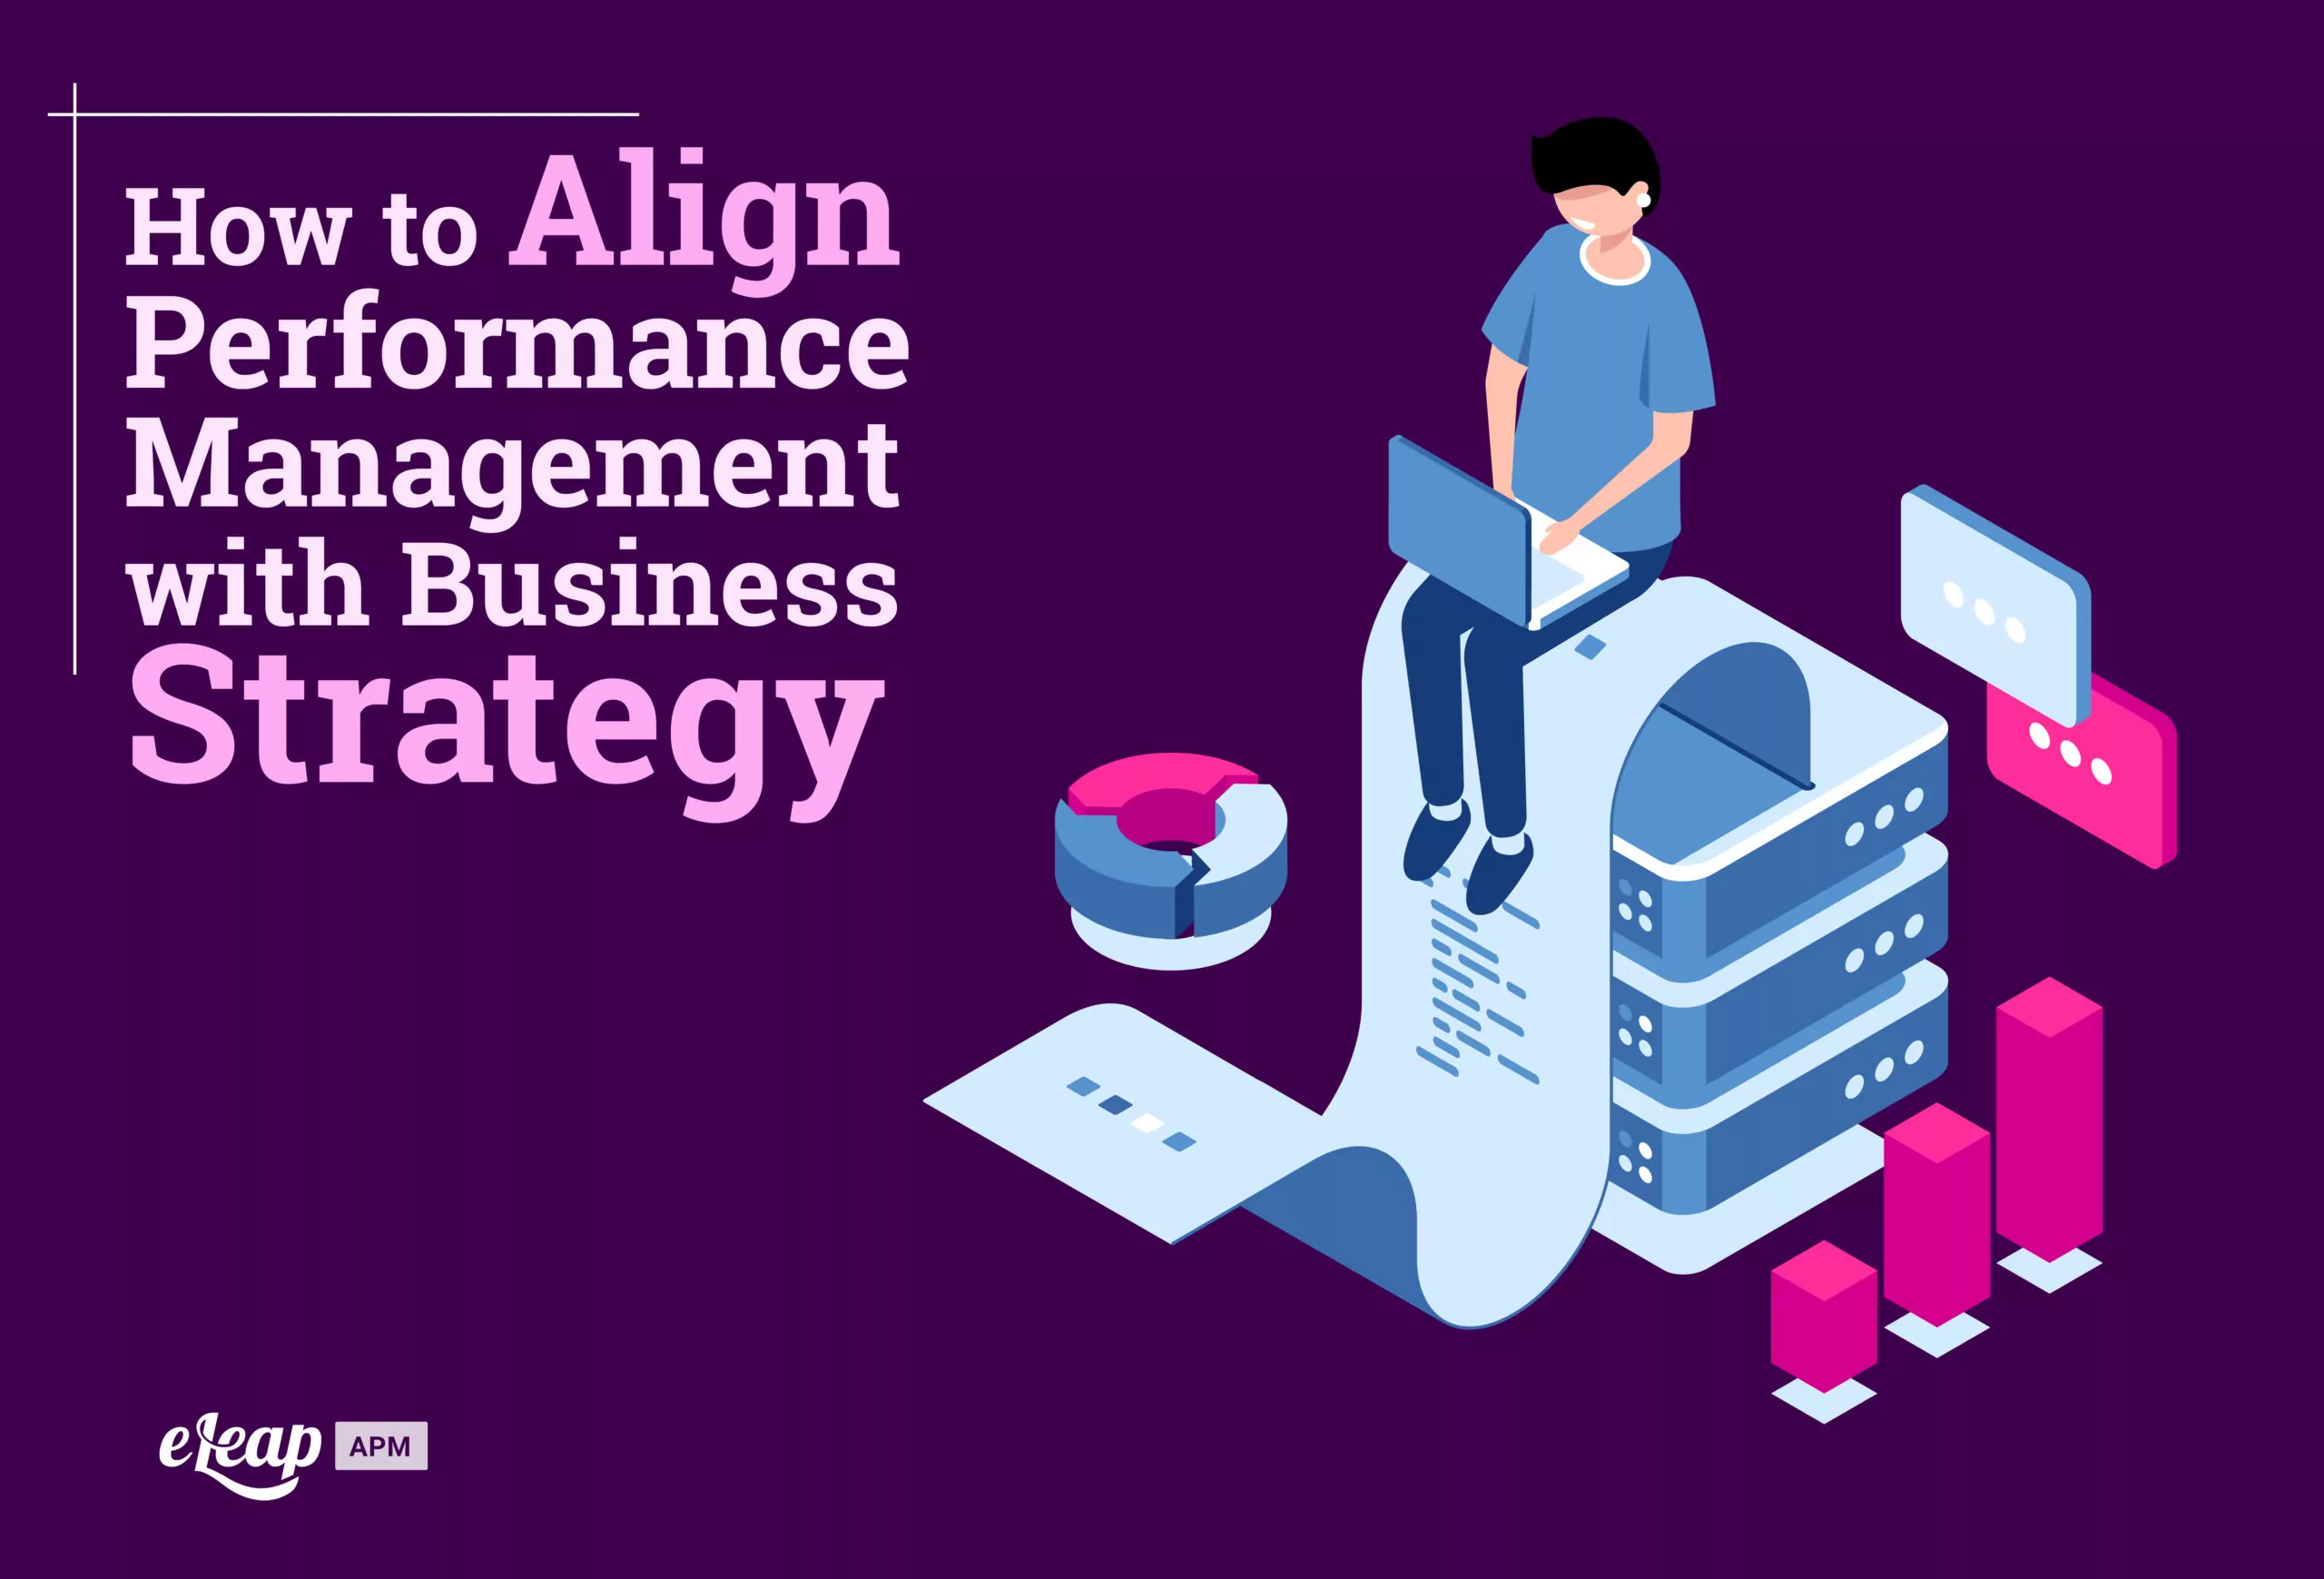 How to Align Performance Management with Business Strategy